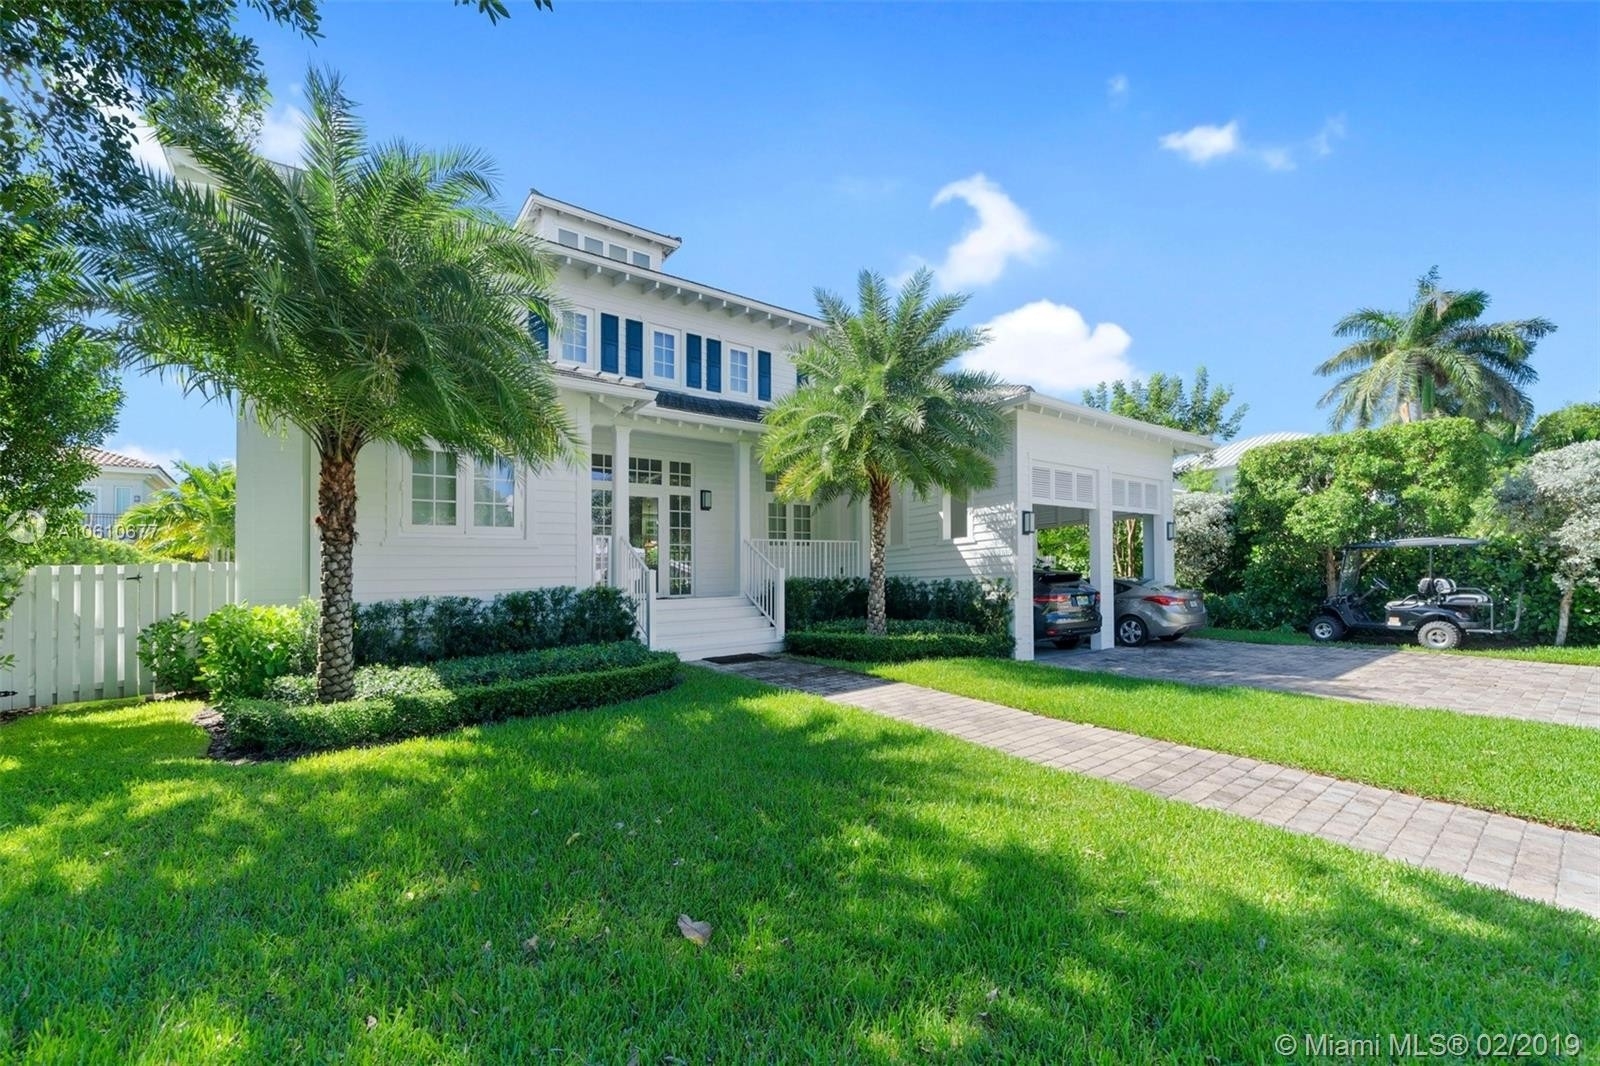 Single Family Home at Key Biscayne